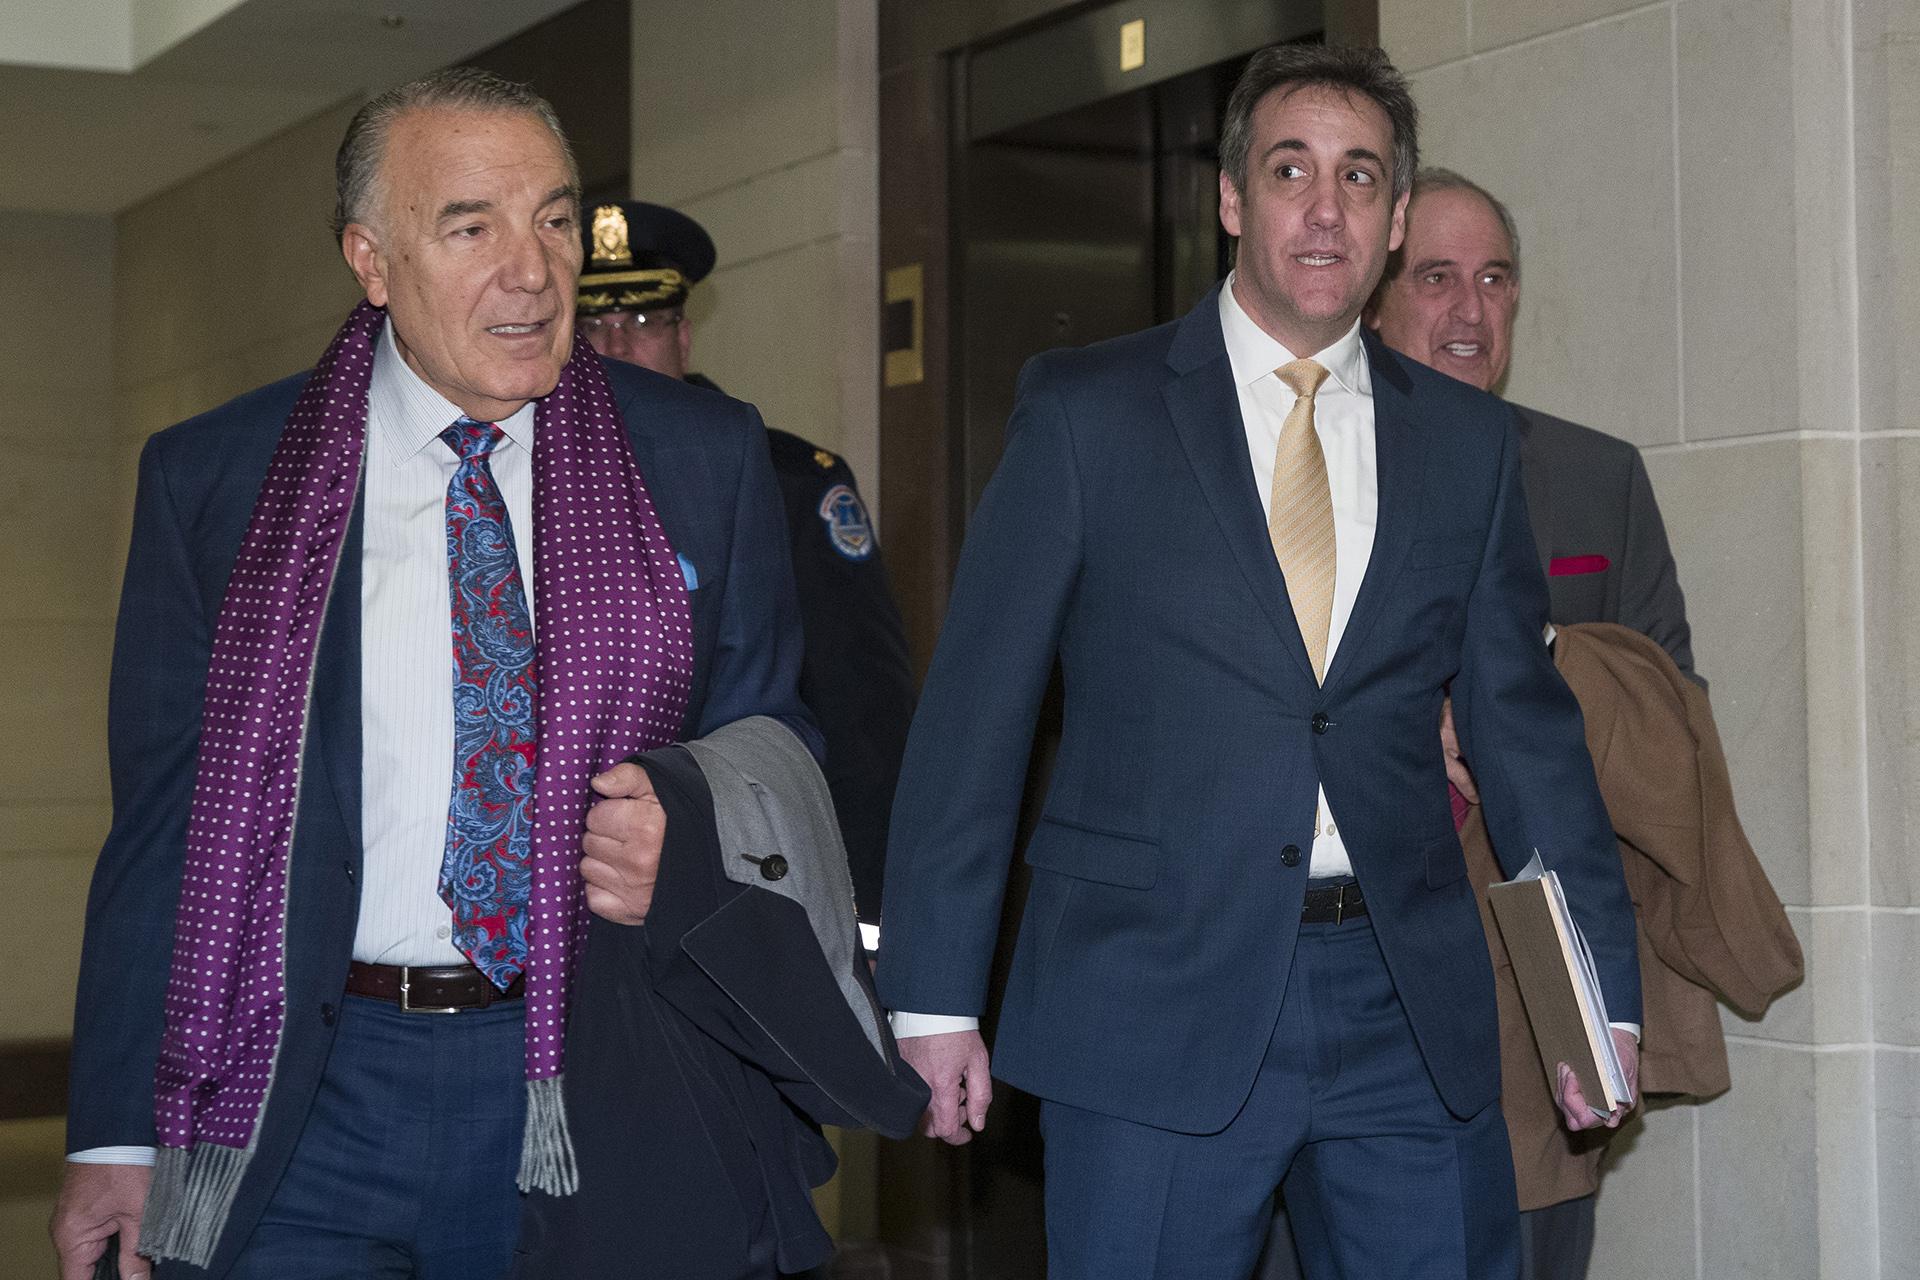 Michael Cohen, right, President Donald Trump's former personal lawyer, arrives to testify before a closed-door hearing of the House Intelligence Committee accompanied by his lawyer, Michael Monico of Chicago, on Capitol Hill, Thursday, Feb. 28, 2019. (AP Photo / Alex Brandon)